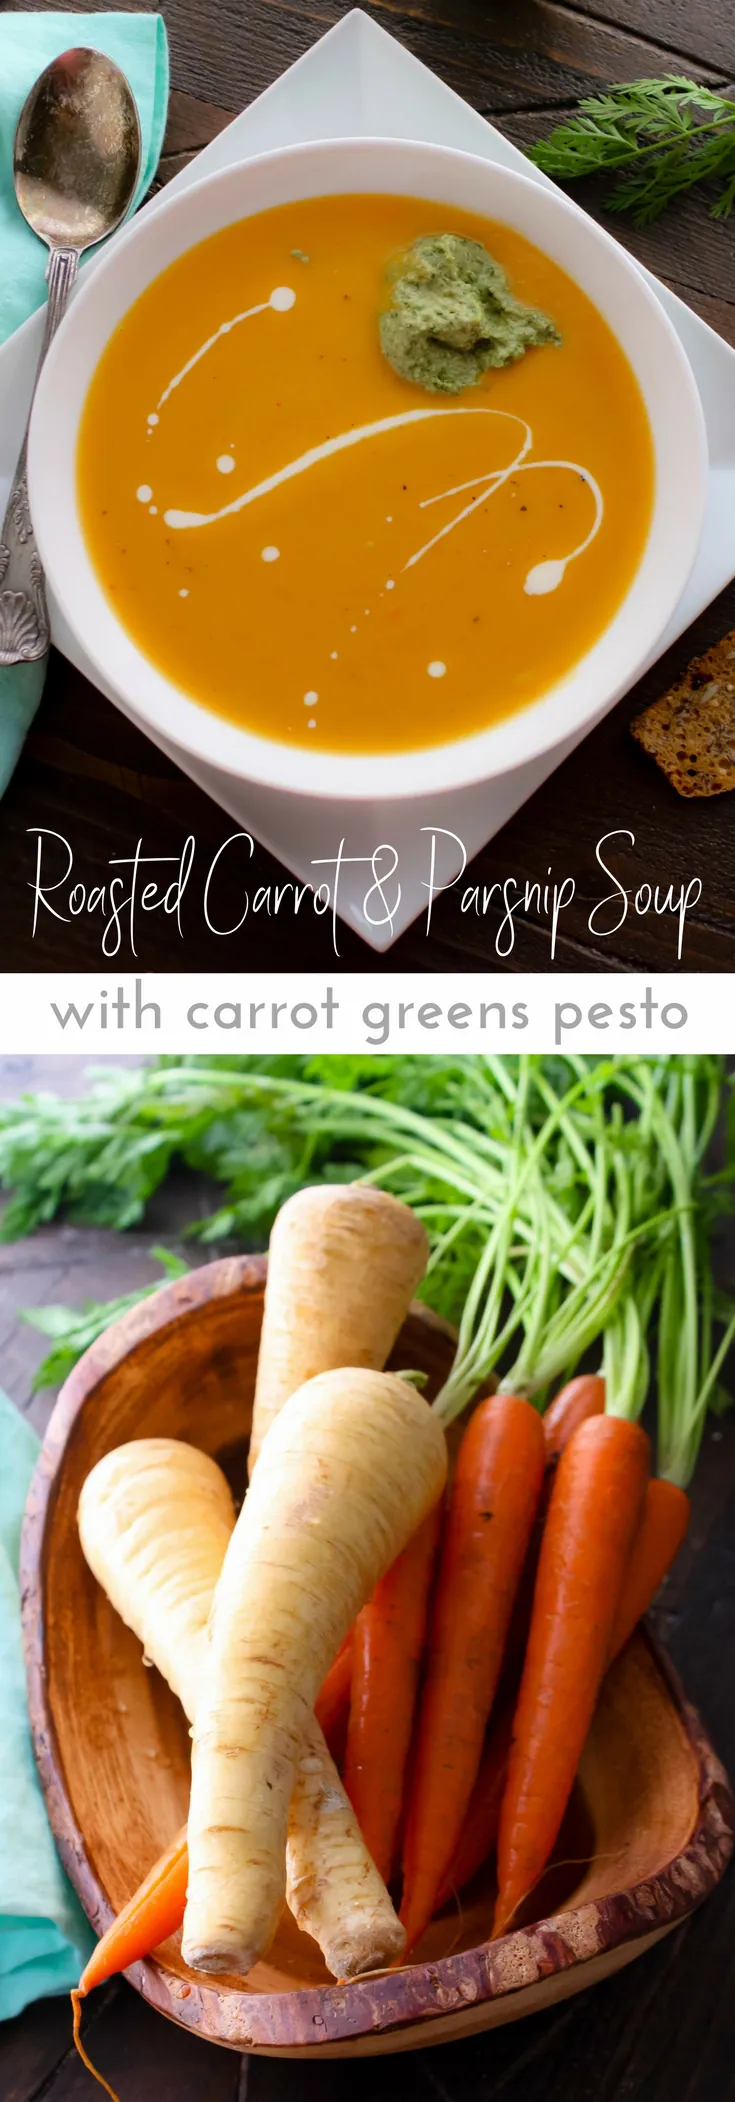 Roasted Carrot and Parsnip Soup with Carrot Greens Pesto is a delightful dish for any night of the week, including Meatless Mondays! Whip up a batch of Roasted Carrot and Parsnip Soup with Carrot Greens Pesto soon!